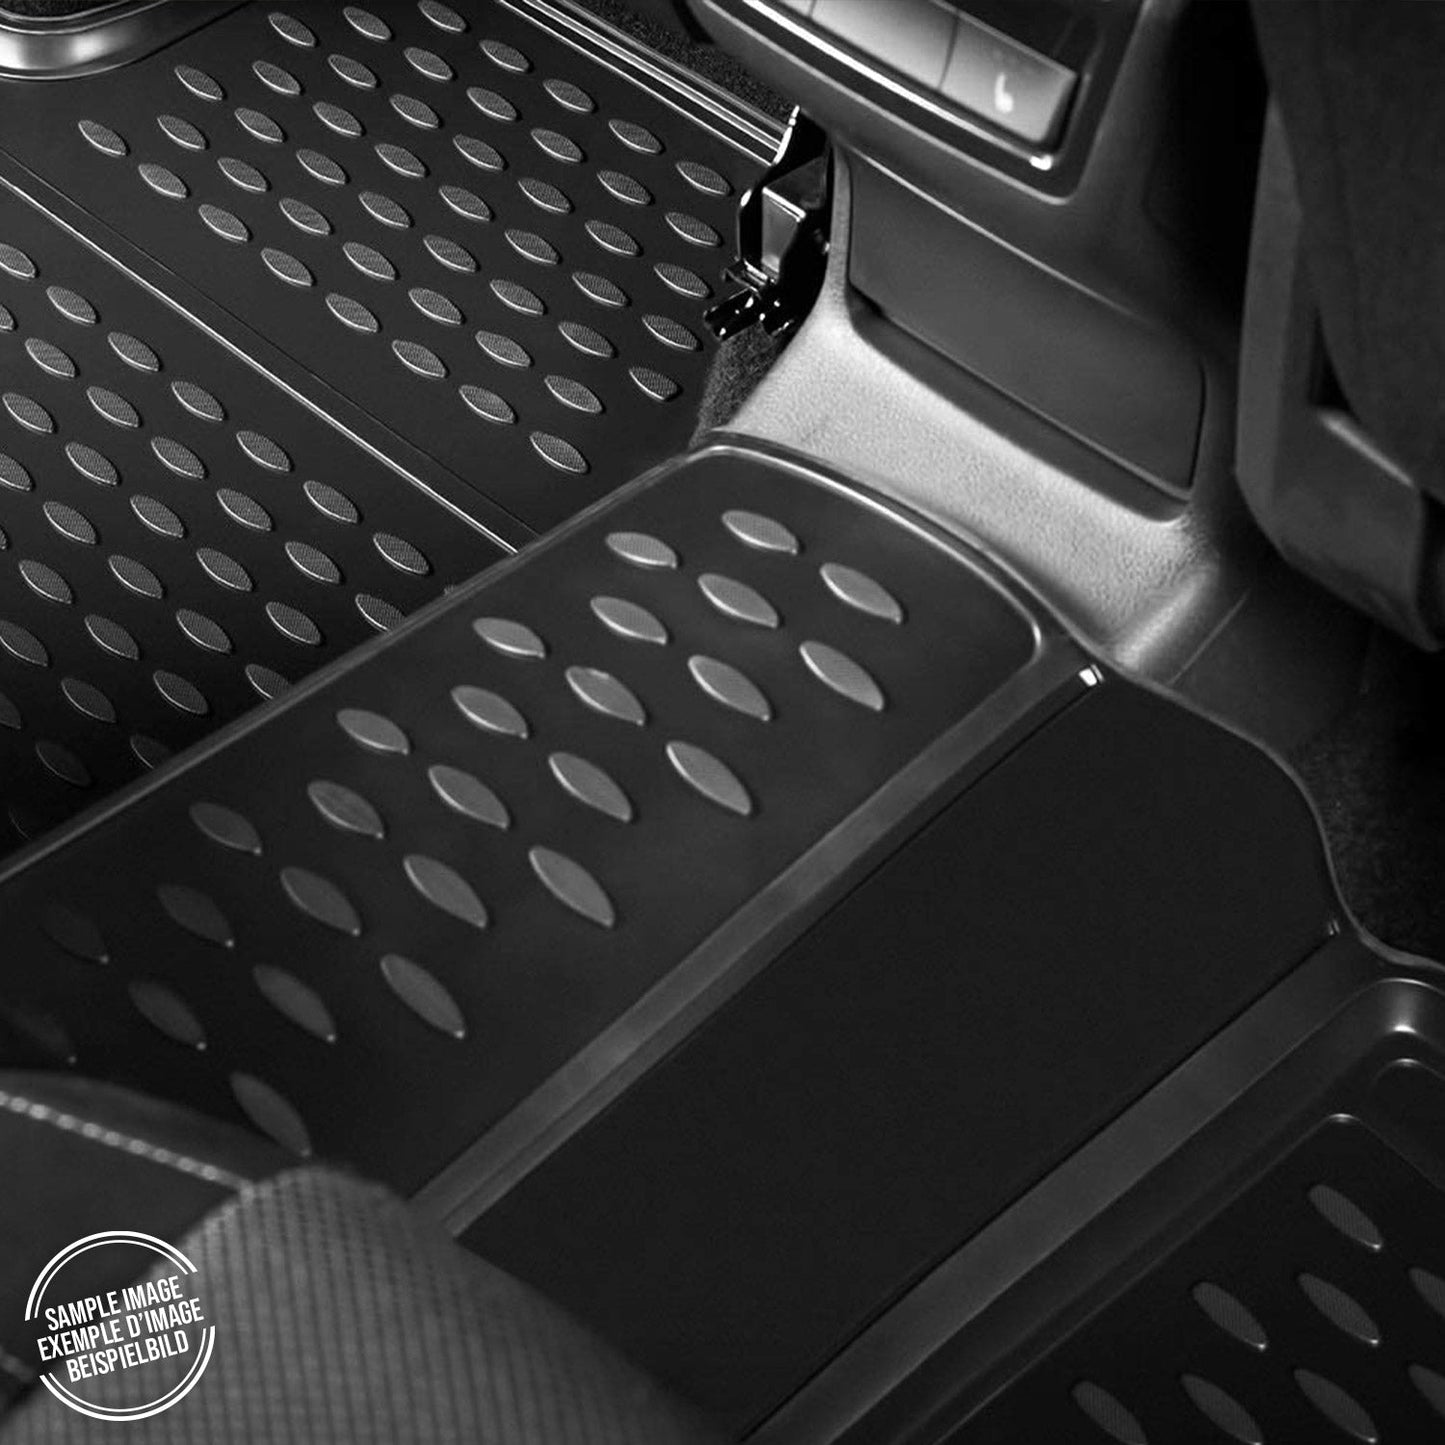 OMAC Floor Mats Liner for Mitsubishi Montero 1999-2006 Black TPE All-Weather 4x 4999444